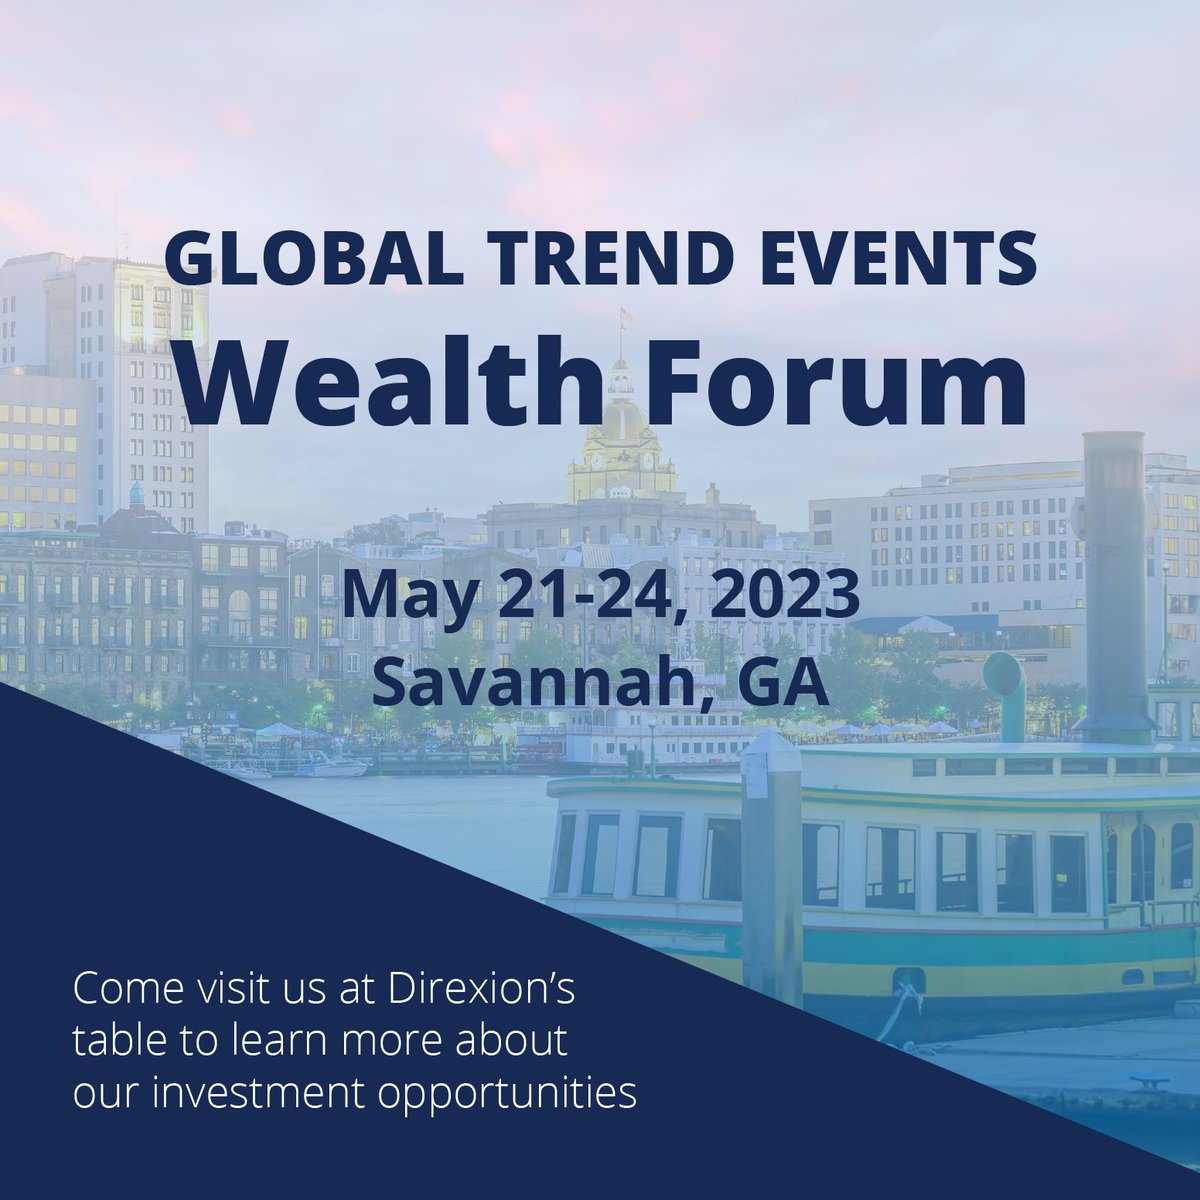 We’re excited to be attending the #GTEWealthForum. Stop by and learn about Direxion’s Non-Leveraged #ETFs: Direxion Auspice Broad Commodity Strategy ETF $COM and Direxion NASDAQ-100® Equal Weighted Index Shares $QQQE $COM: trib.al/ERmYbbj $QQQE: trib.al/y4W8jRg